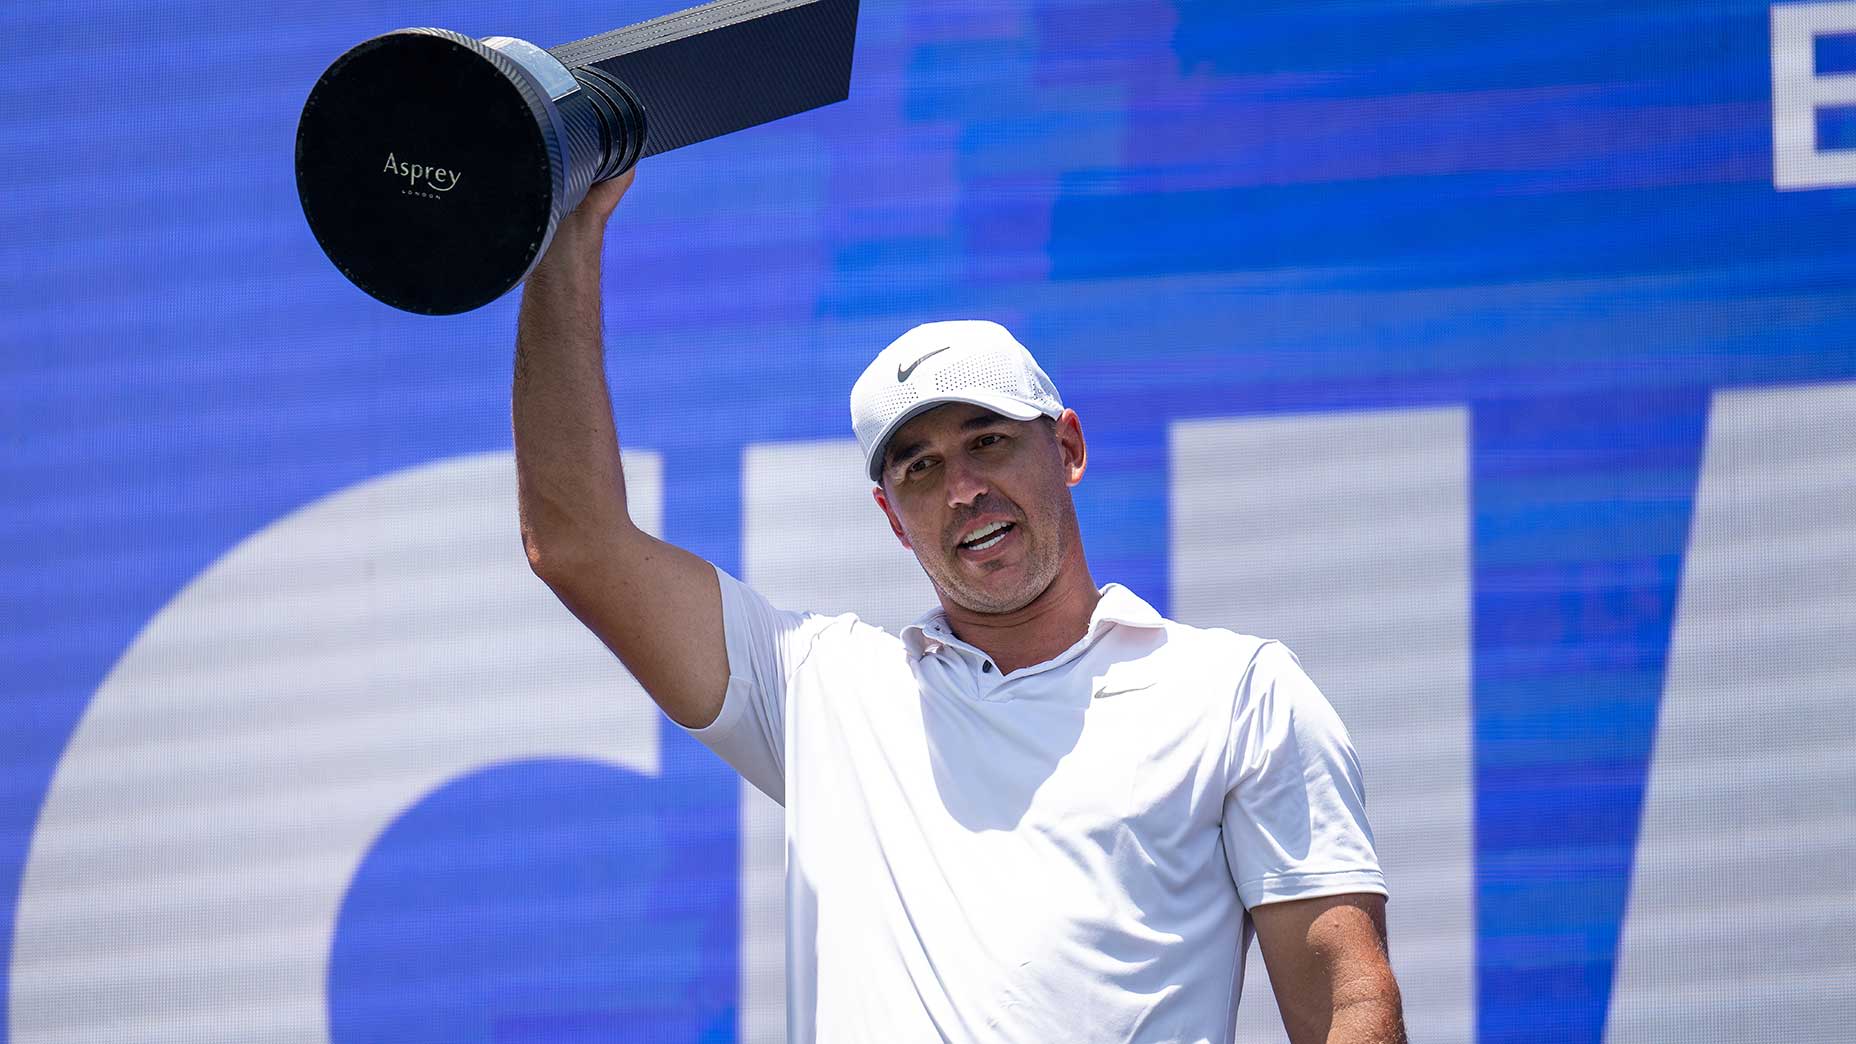 Brooks Koepka wins LIV Golf event in lead up to PGA Championship title defense